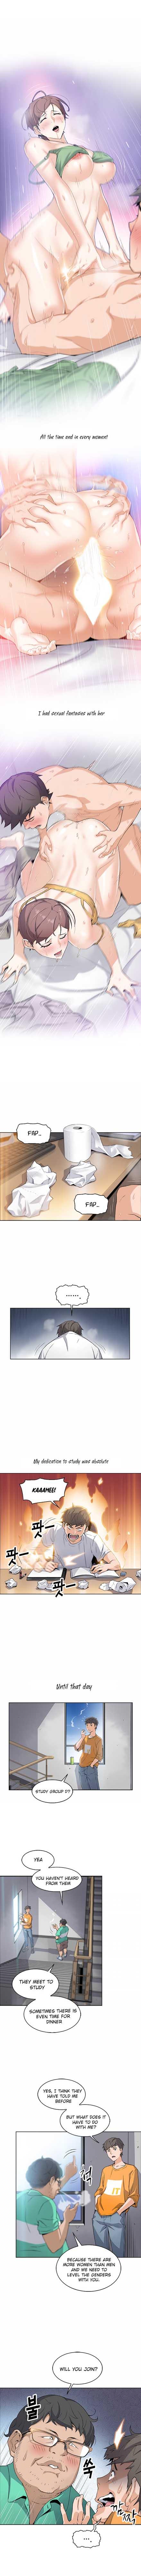 Big Dildo Housekeeper [Neck Pillow, Paper] Ch.49/49 [English] [Manhwa PDF] Completed Aunty - Page 9